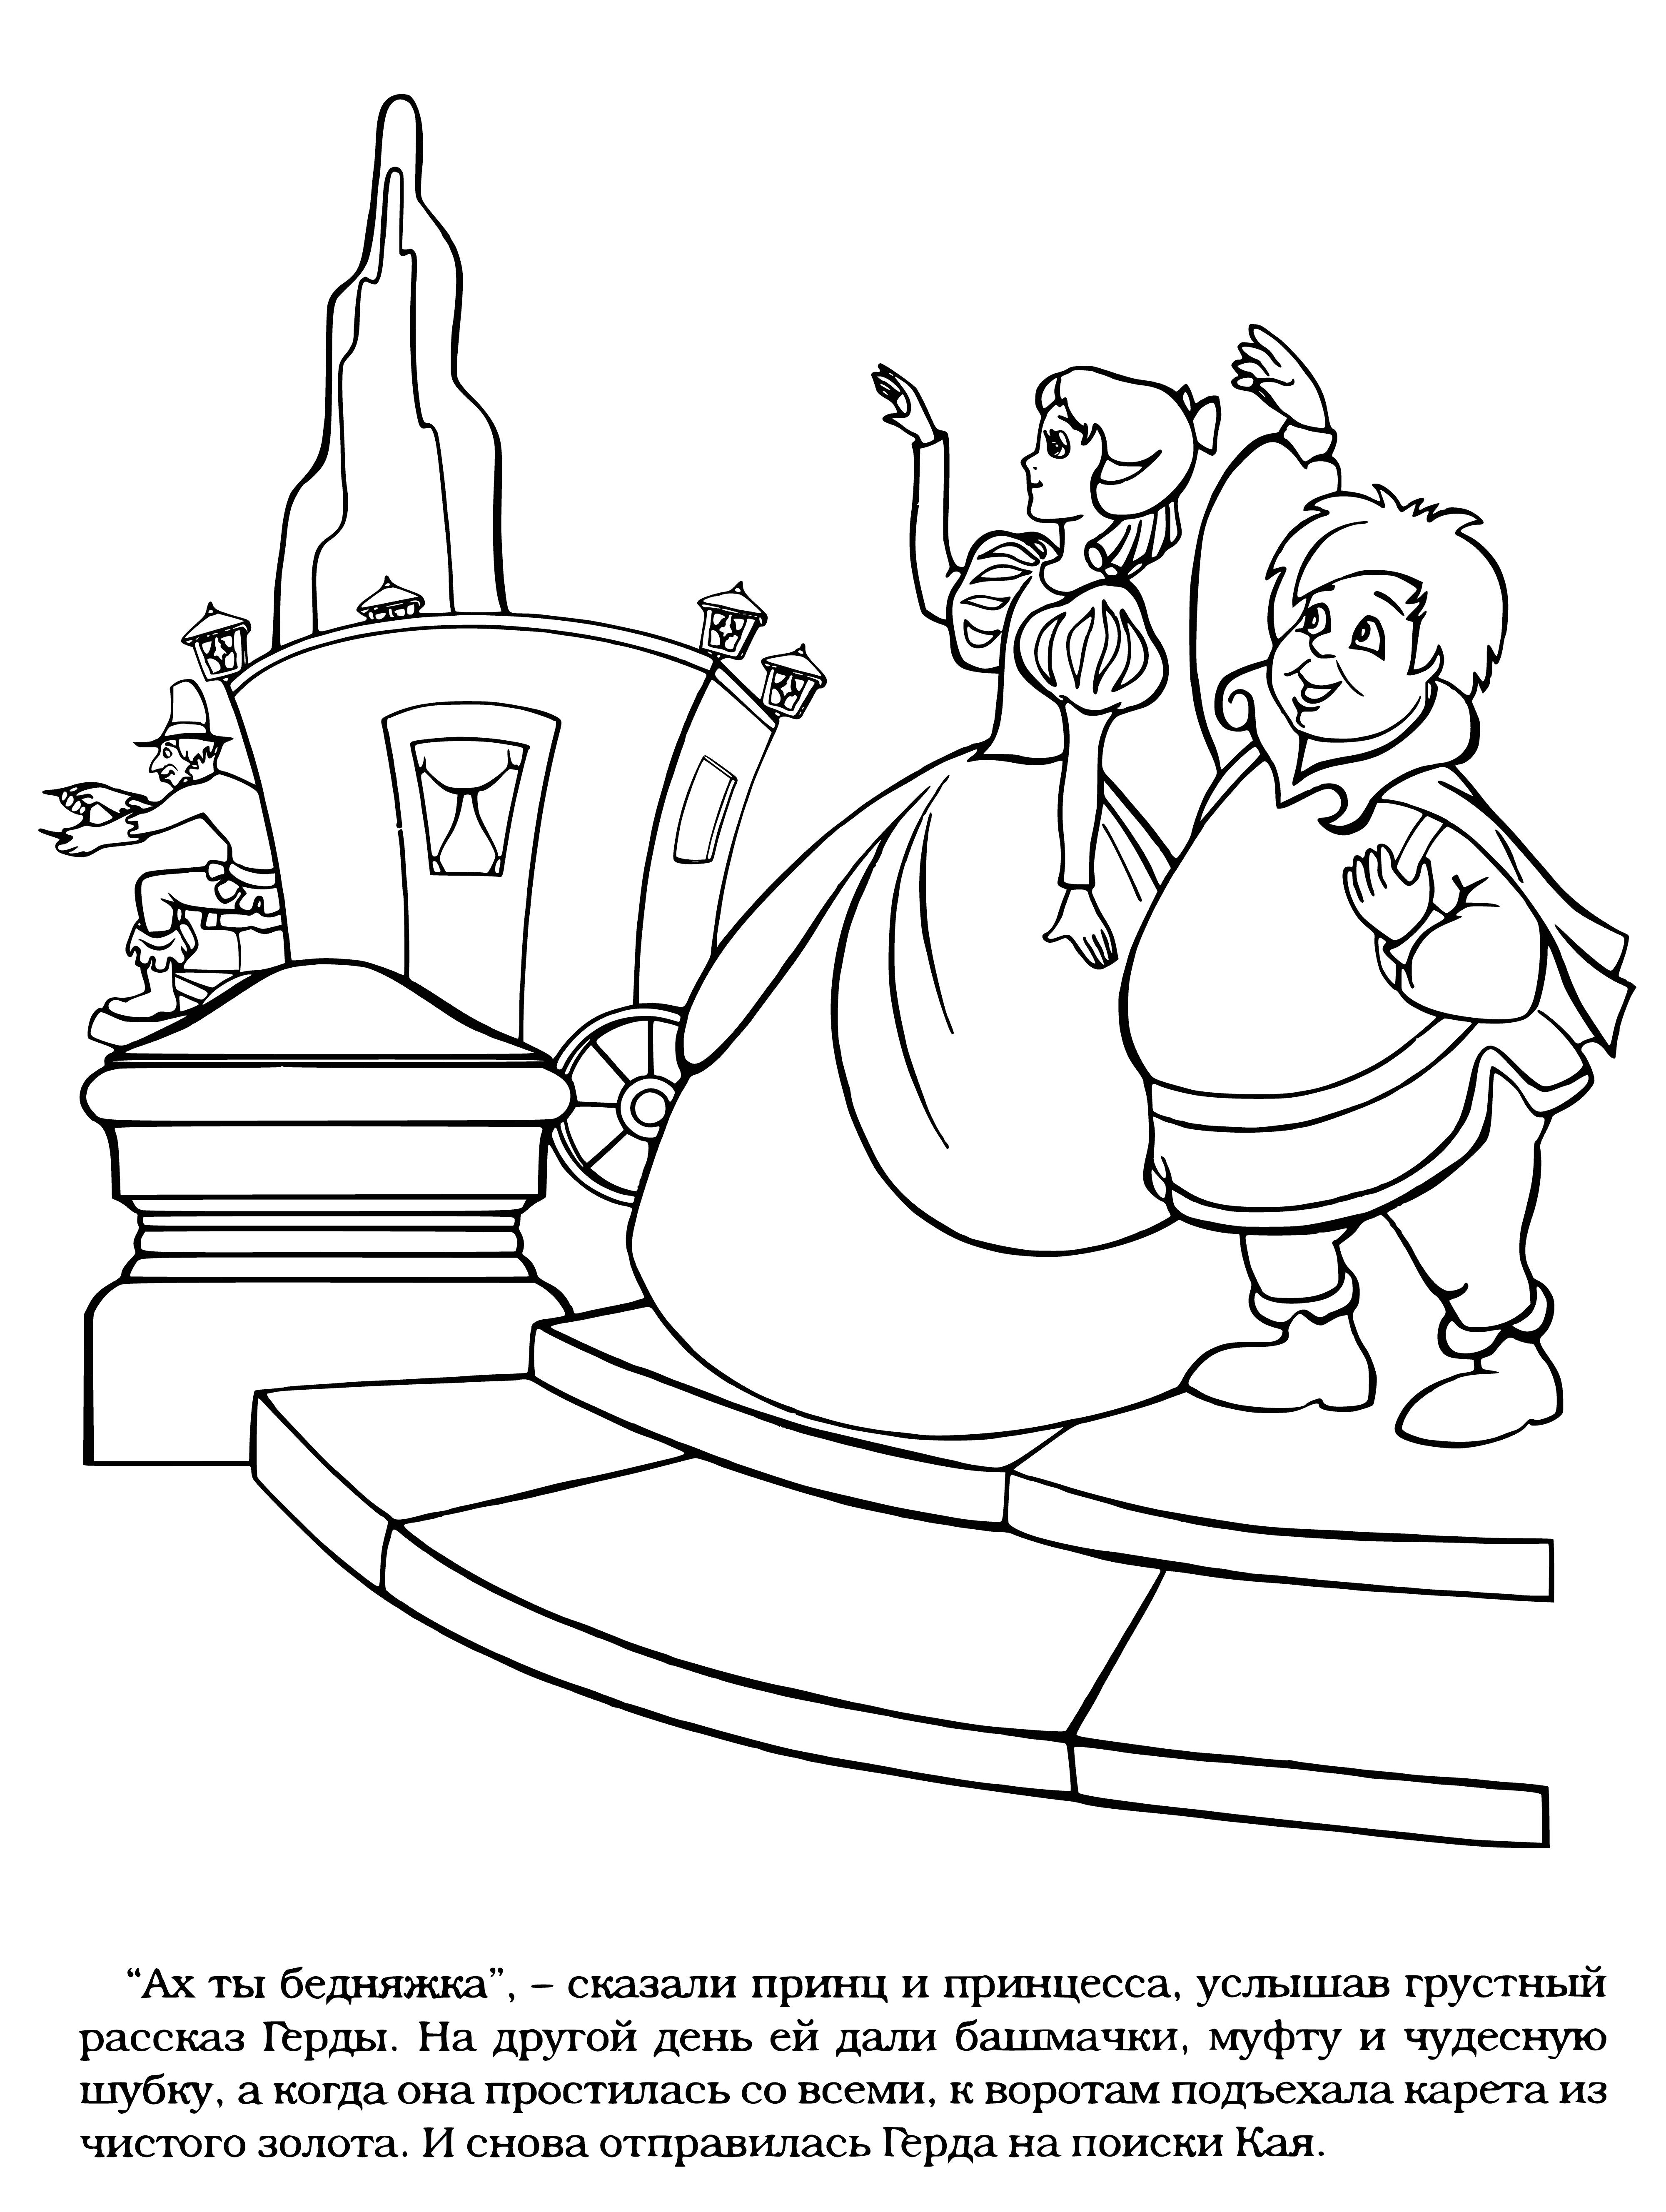 coloring page: Prince & Princess sit on red couch. He in blue suit, white shirt, red tie. She in white dress w/ blue sash. Both look at book & he has arm around her.